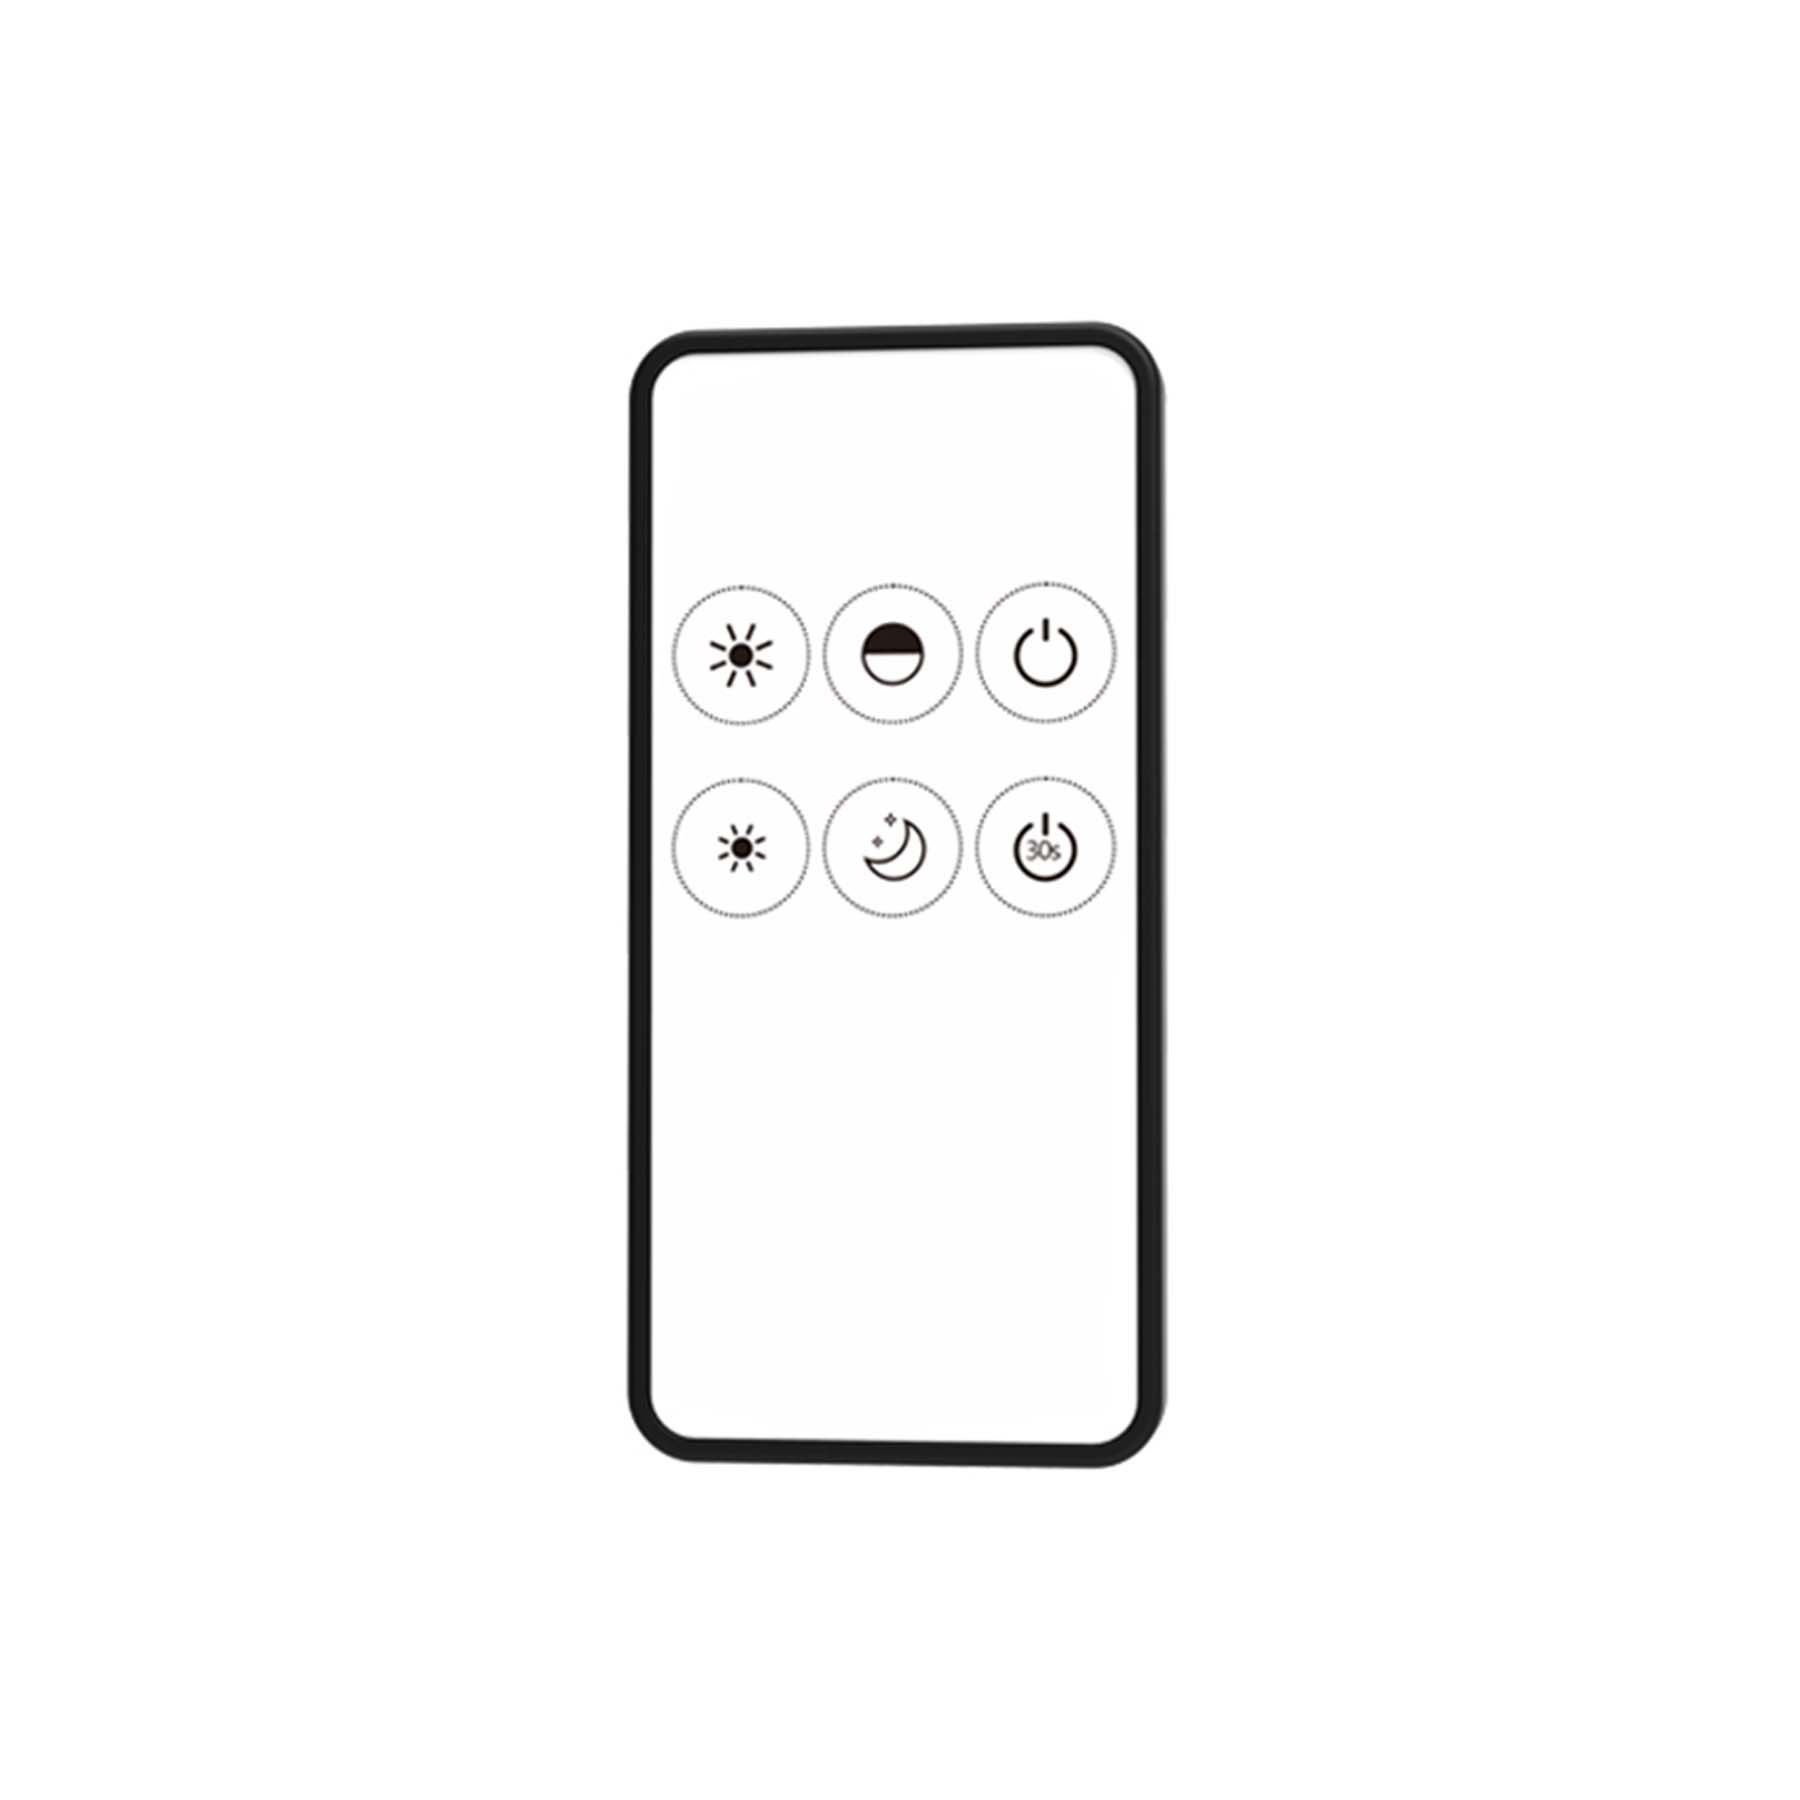 G.W.S. LED LED 5-36V DC Dimming Controller V1 + 1 Zone Remote Control RM1